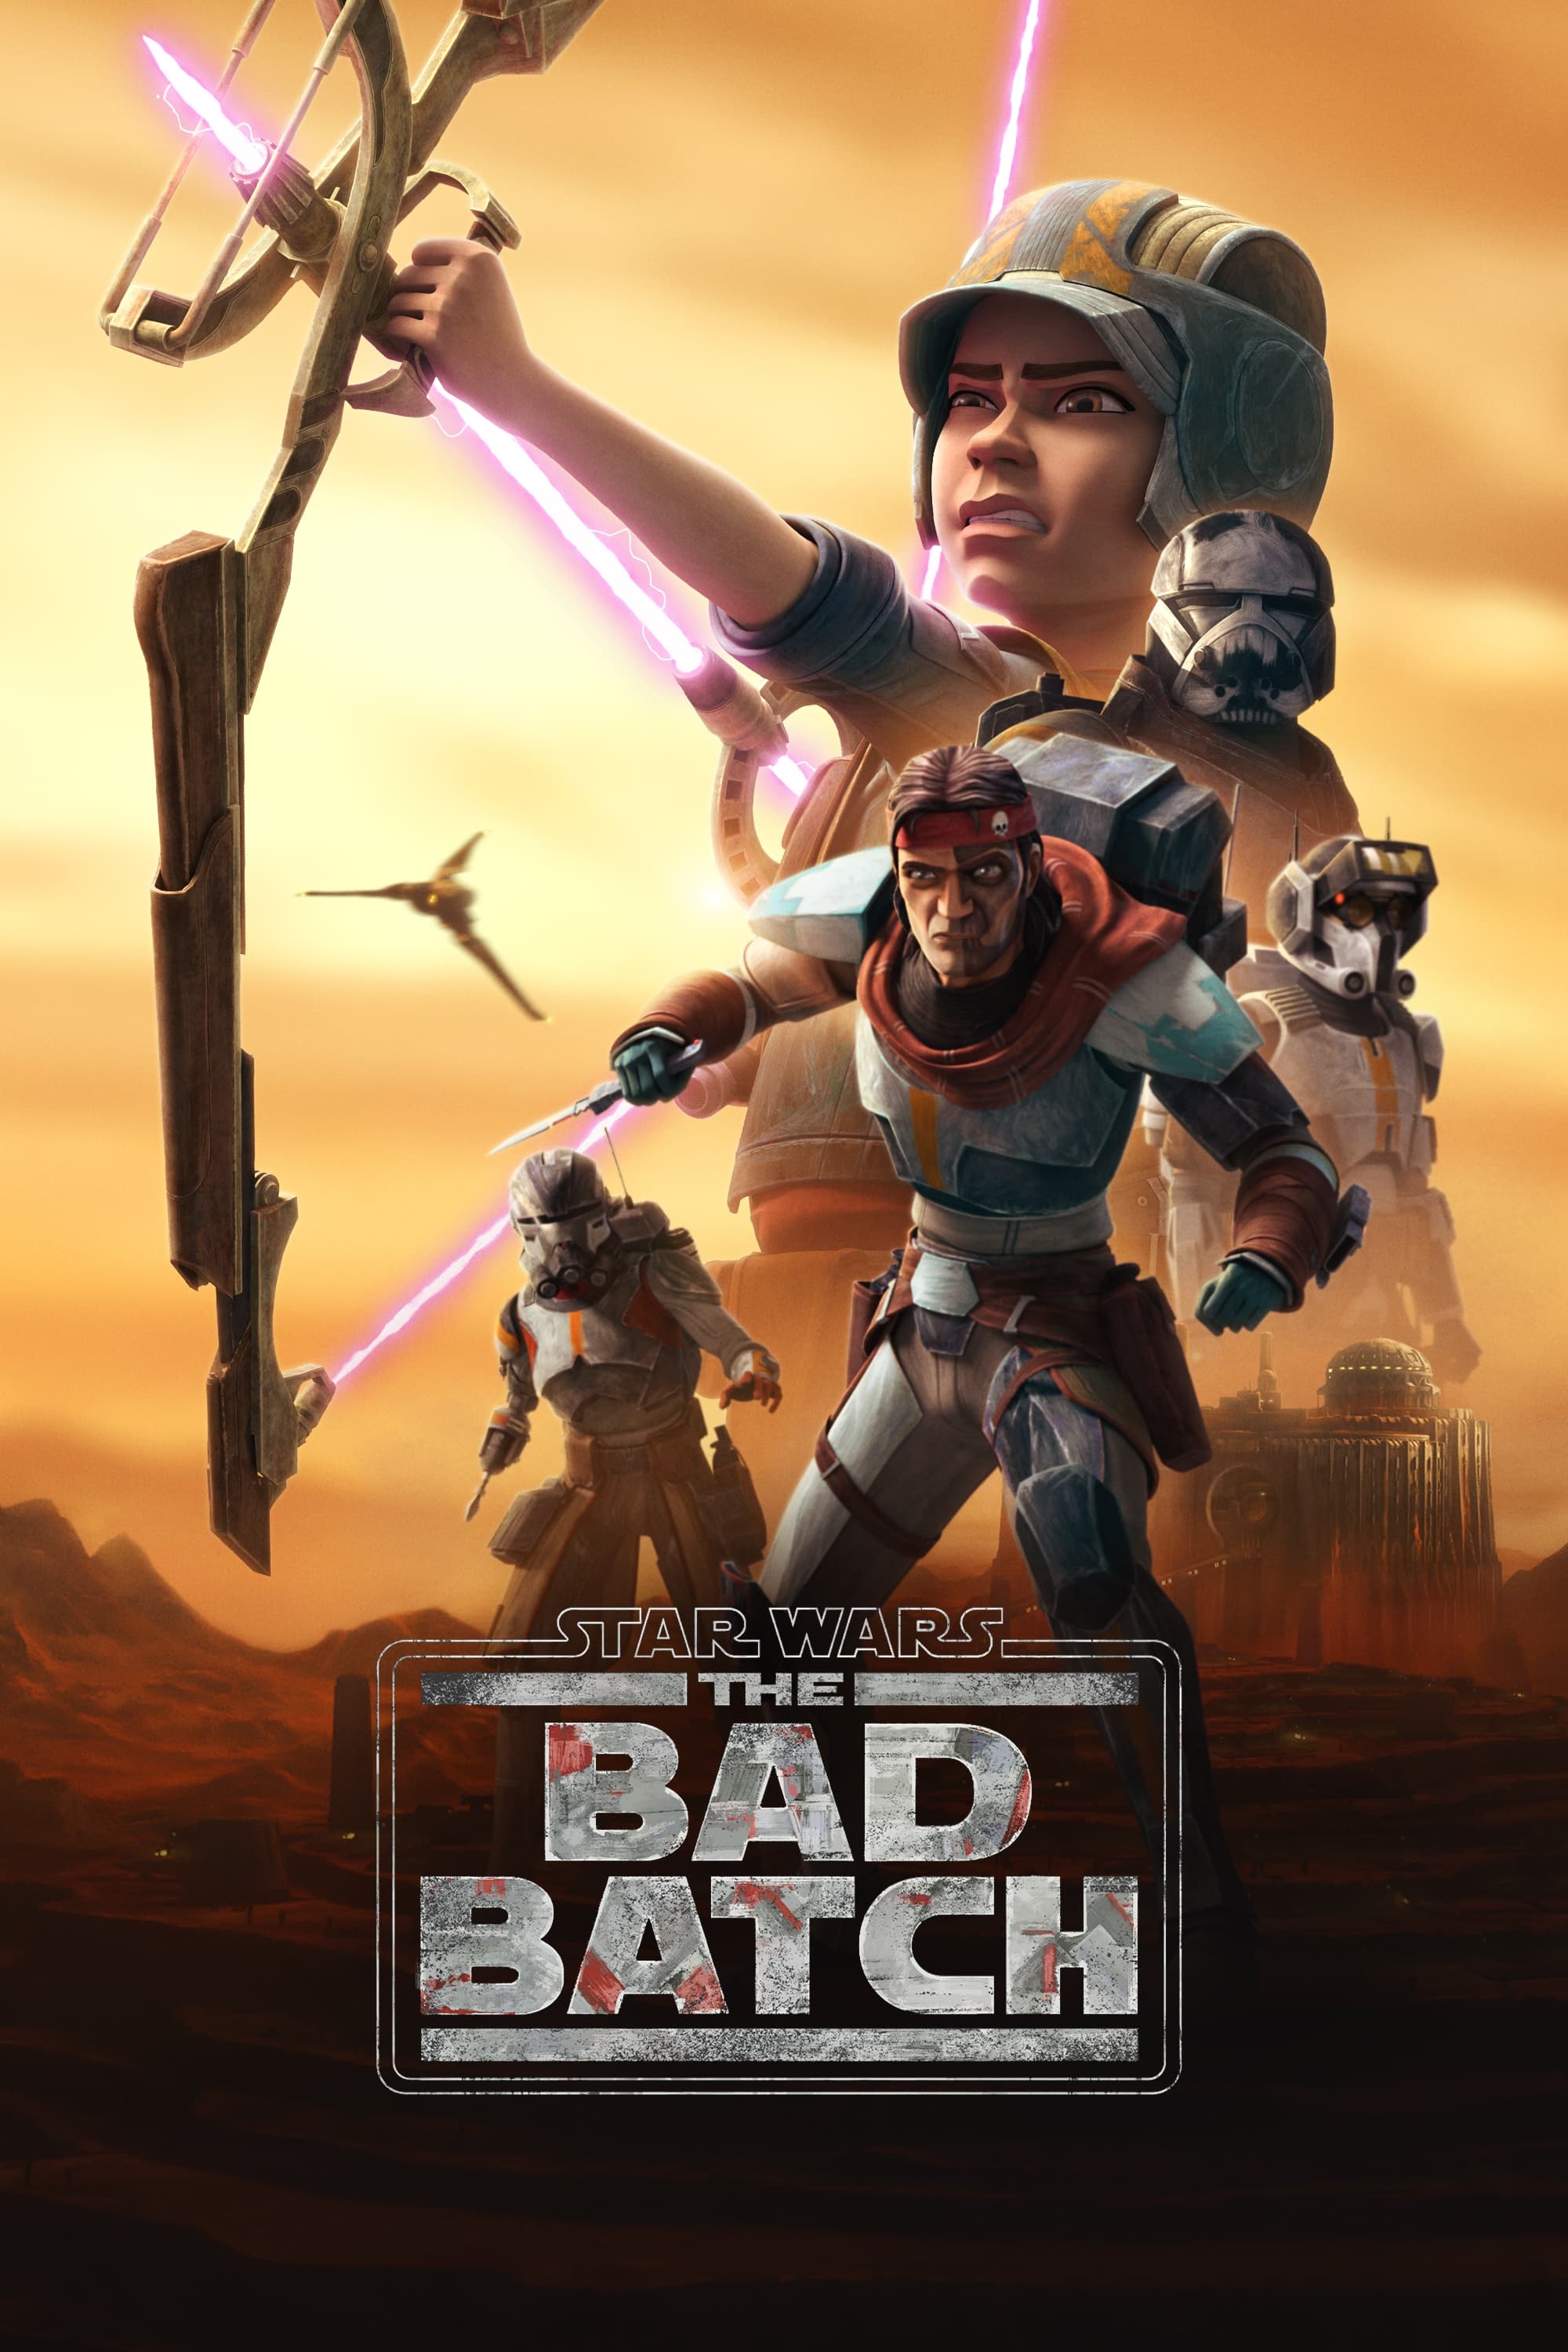 Star Wars: The Bad Batch TV Shows About Military Unit